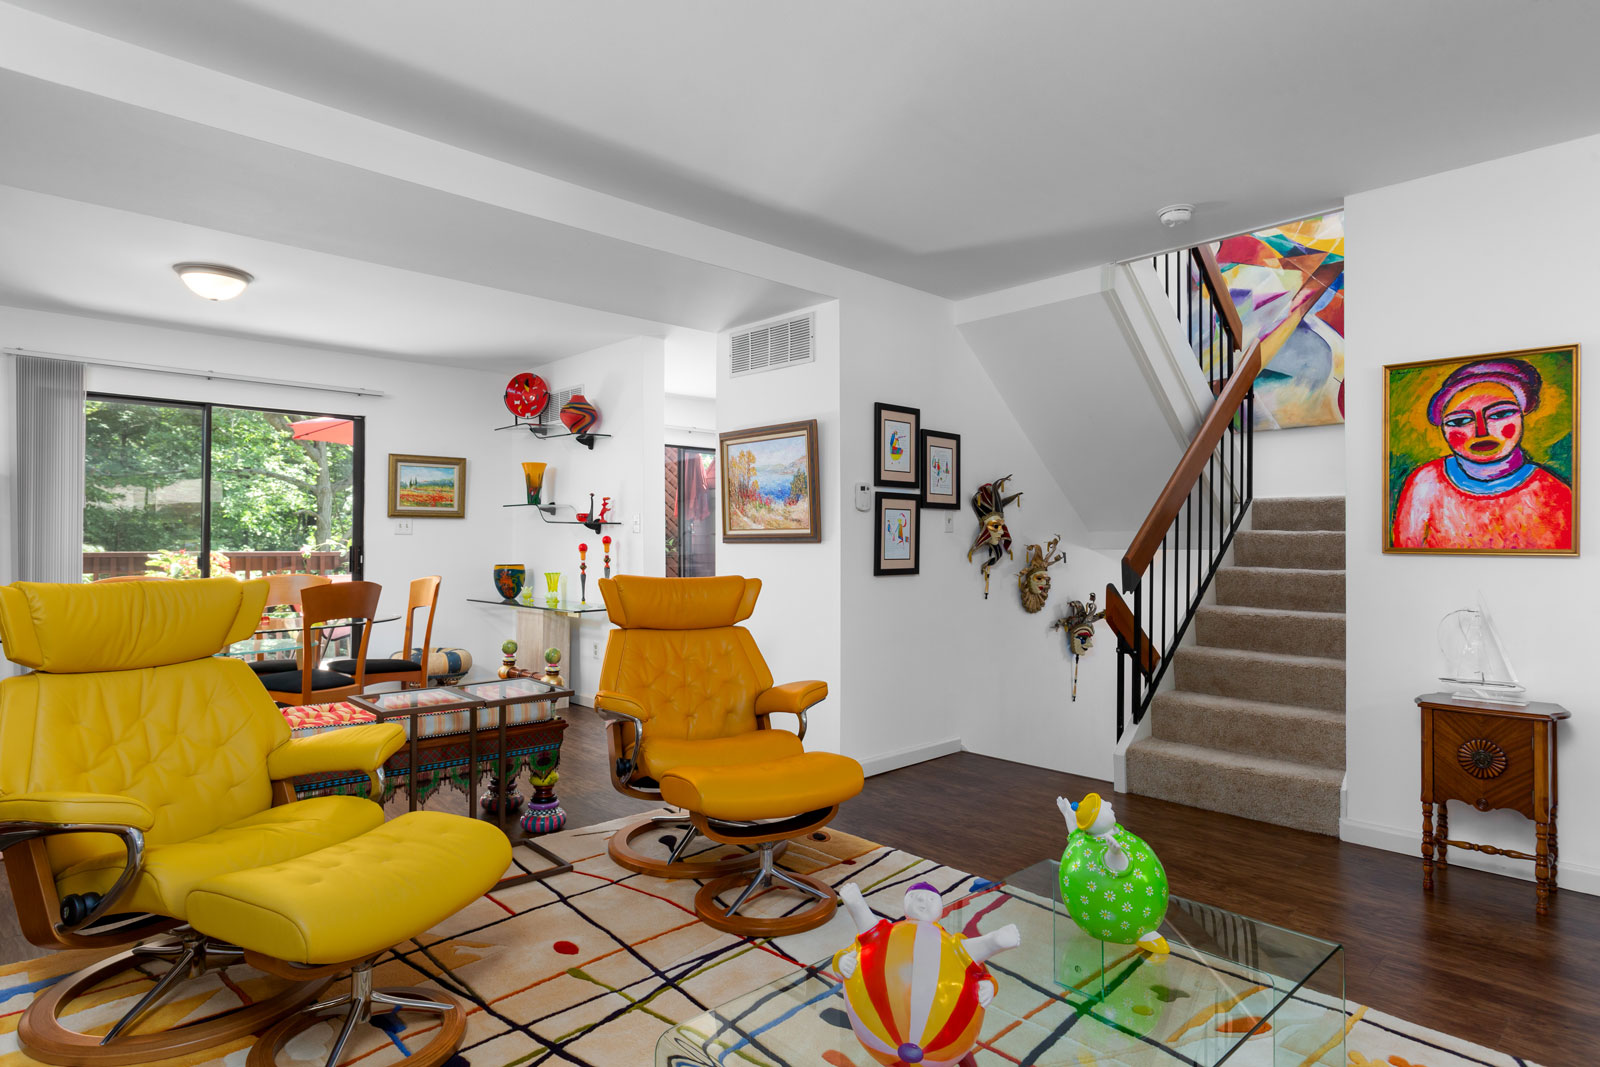 A living room with eclectic decor at Chesterfield Village Apartments